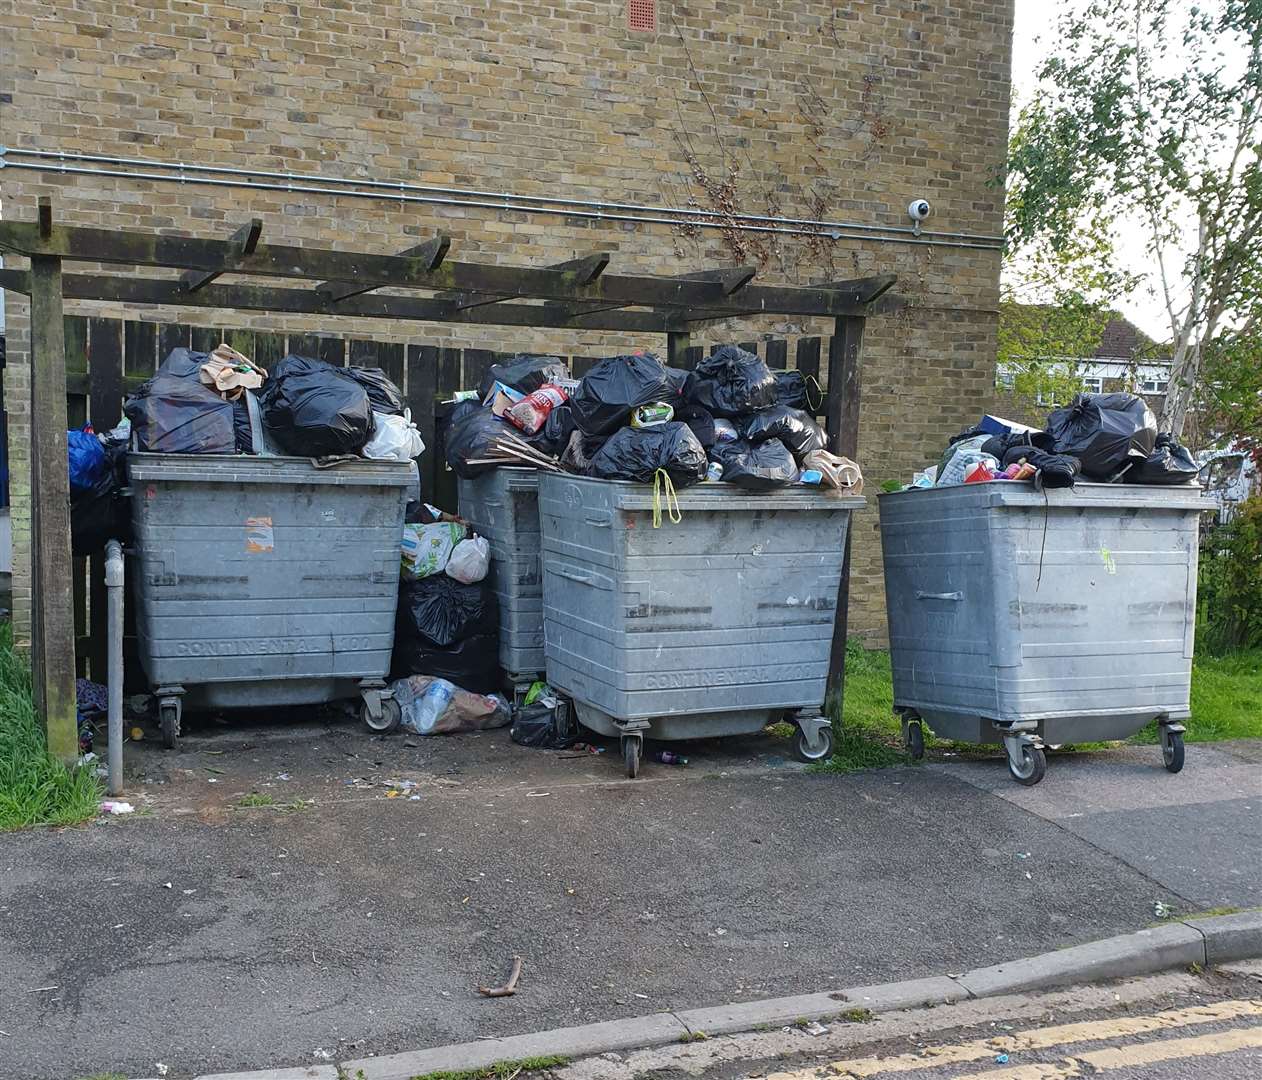 Workers returned earlier this week but left much of the waste behind and still overflowing the bins in Lodge Hill Lane, Chattenden